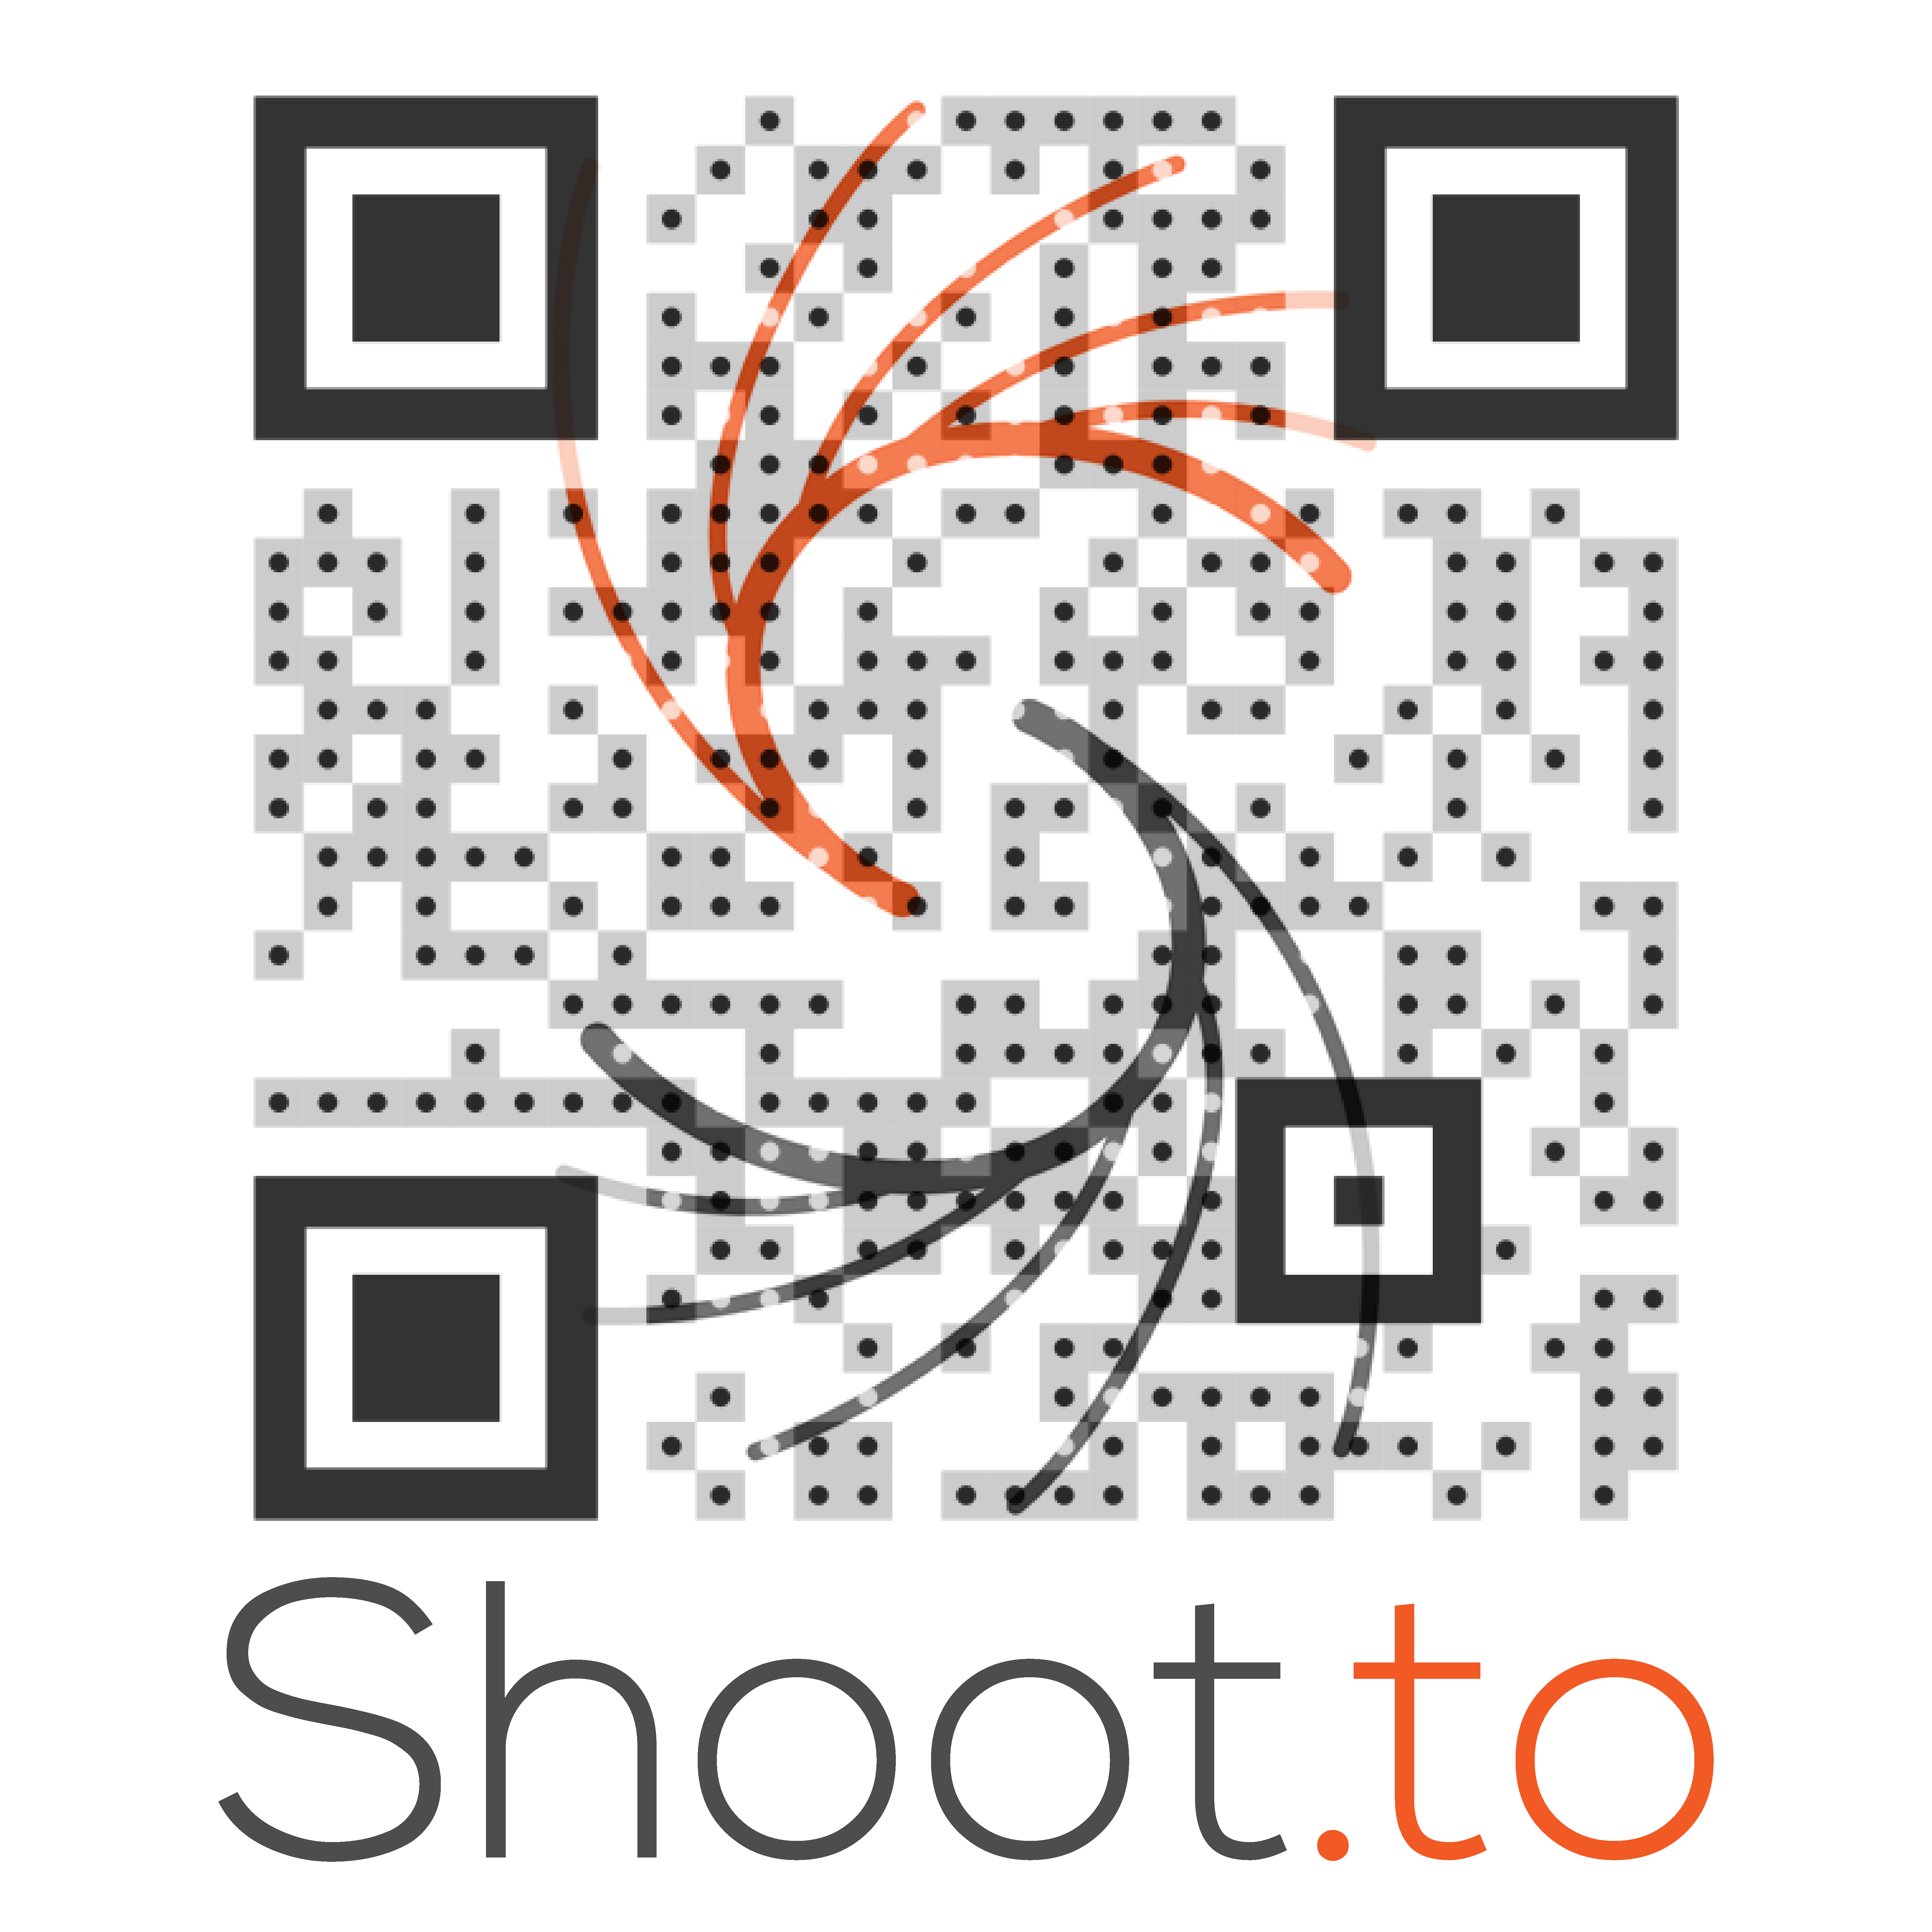 Scan this code for more about Shoot.to